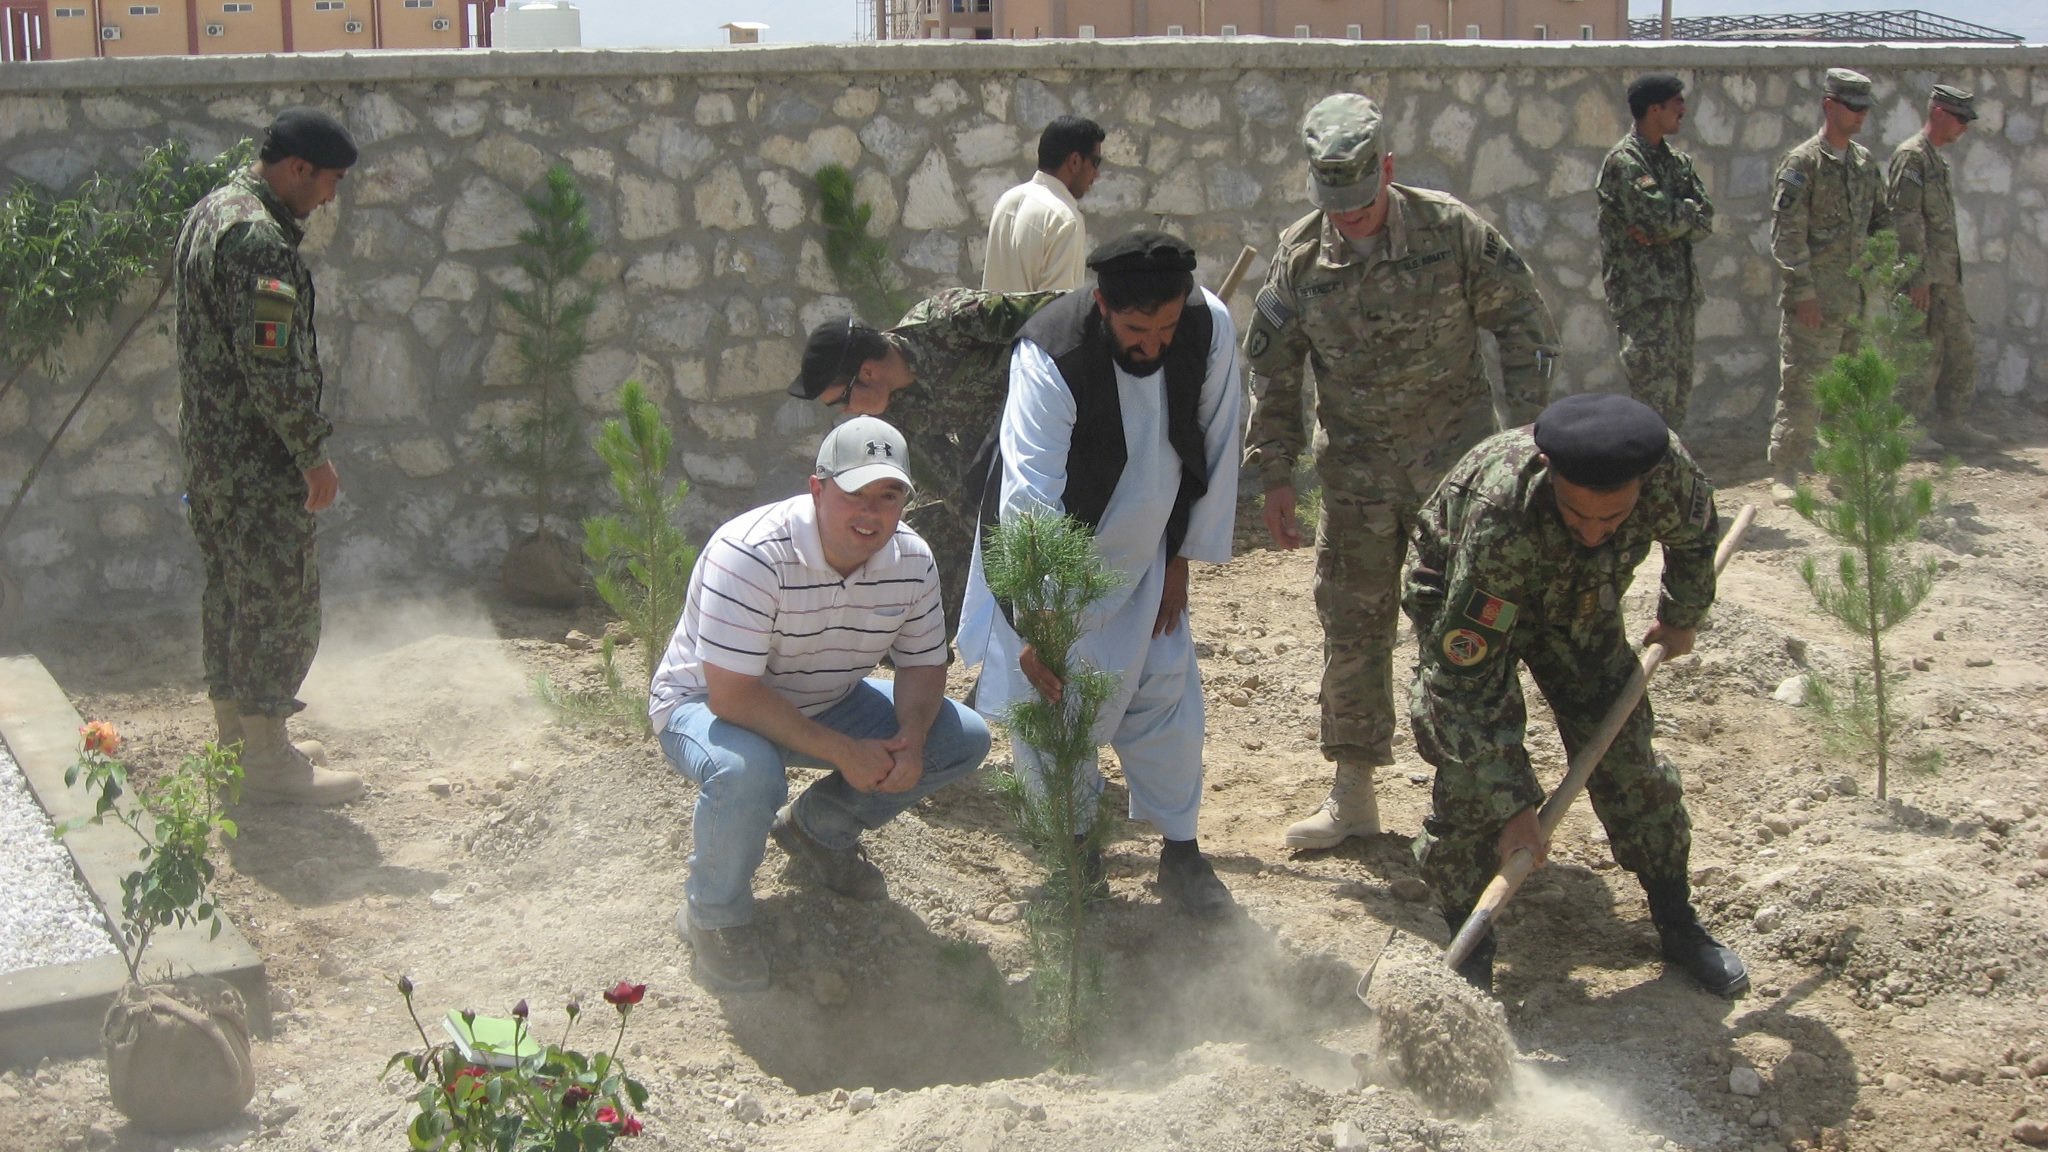 Planted over 100 trees in Afghanistan with U.S. and Afghani soldiers. 